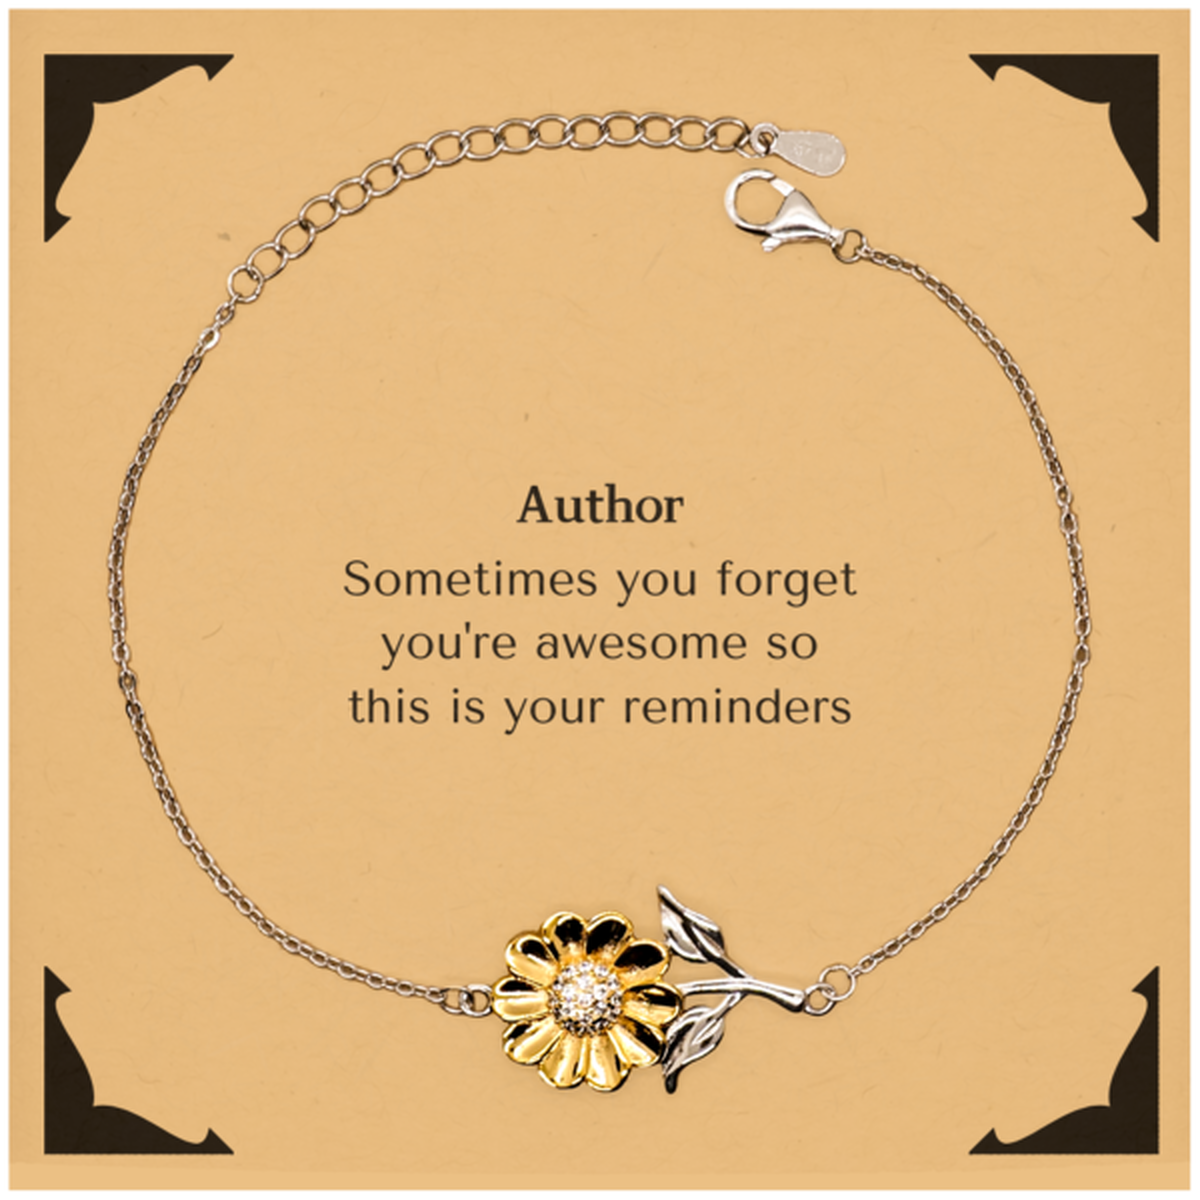 Sentimental Author Sunflower Bracelet, Author Sometimes you forget you're awesome so this is your reminders, Graduation Christmas Birthday Gifts for Author, Men, Women, Coworkers